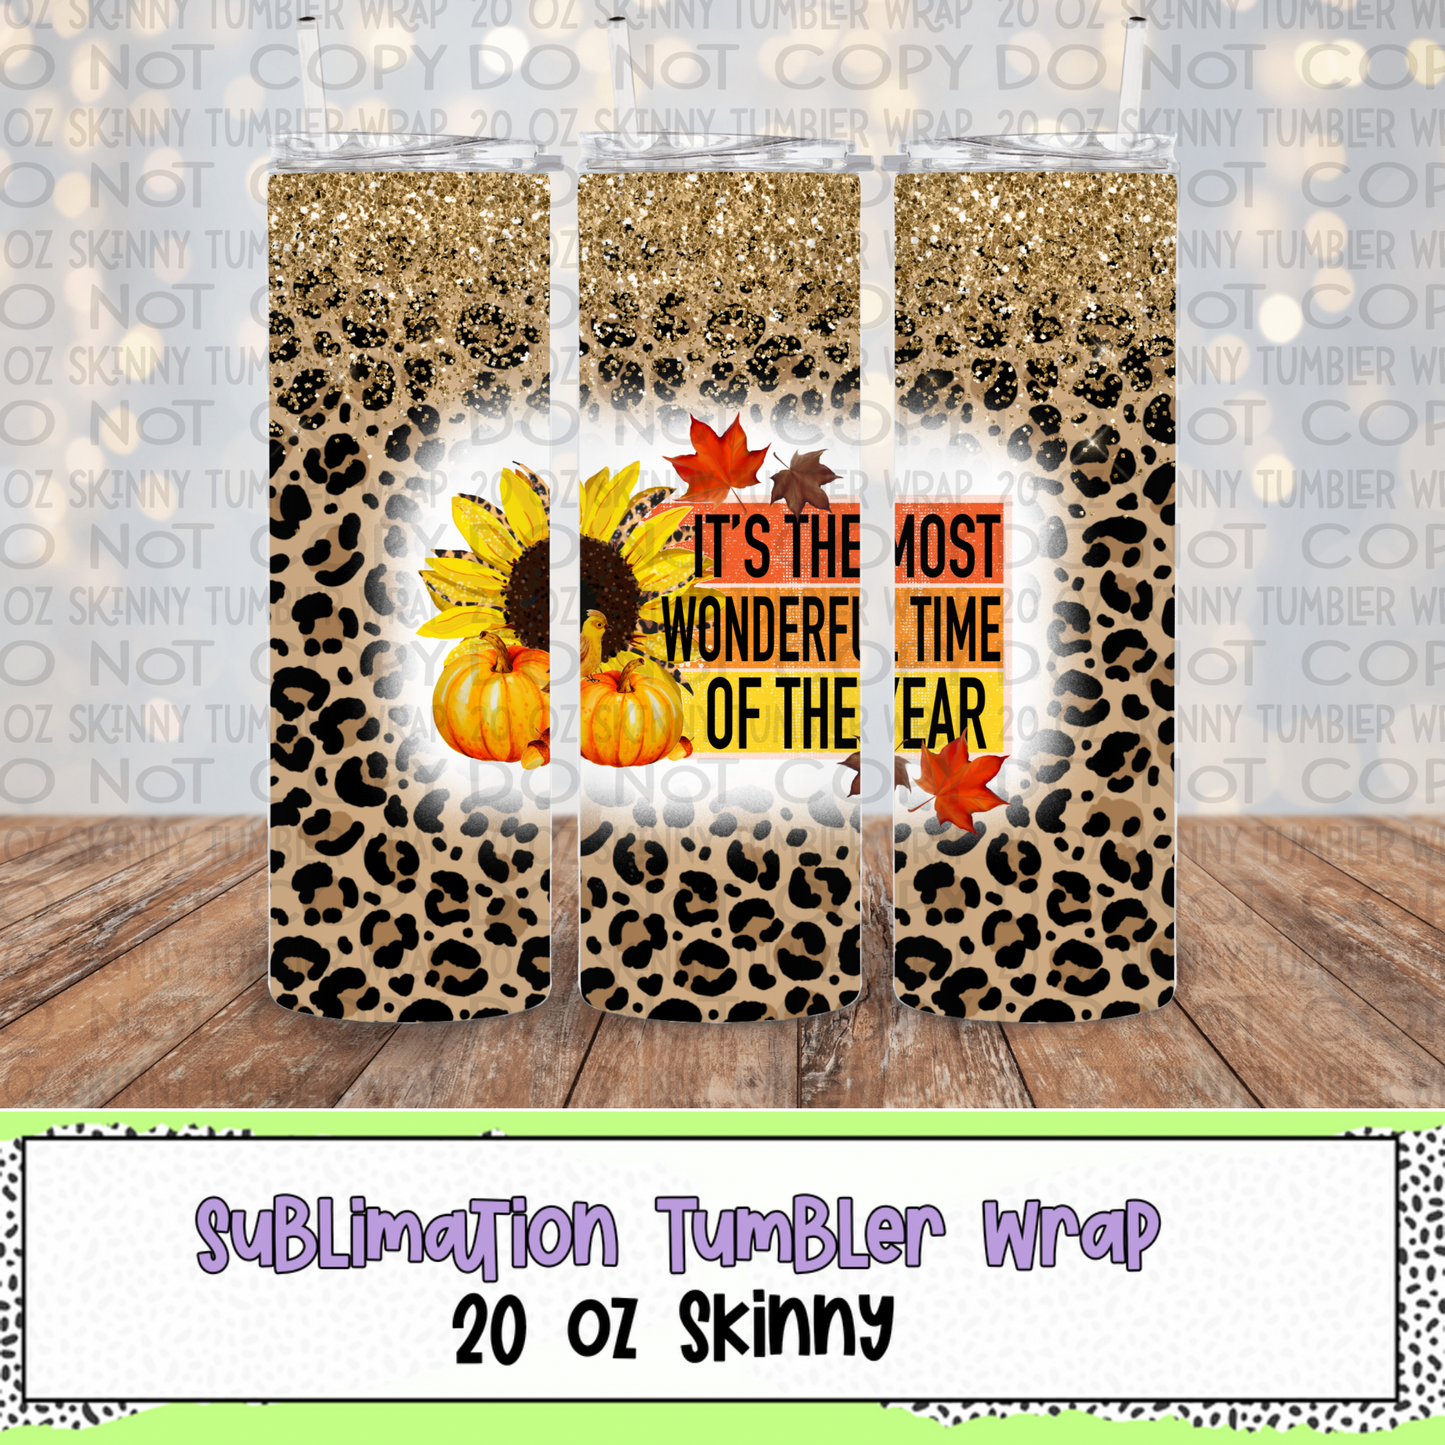 Most Wonderful Time Of The Year 20 Oz Skinny Tumbler Wrap - Sublimation Transfer - RTS